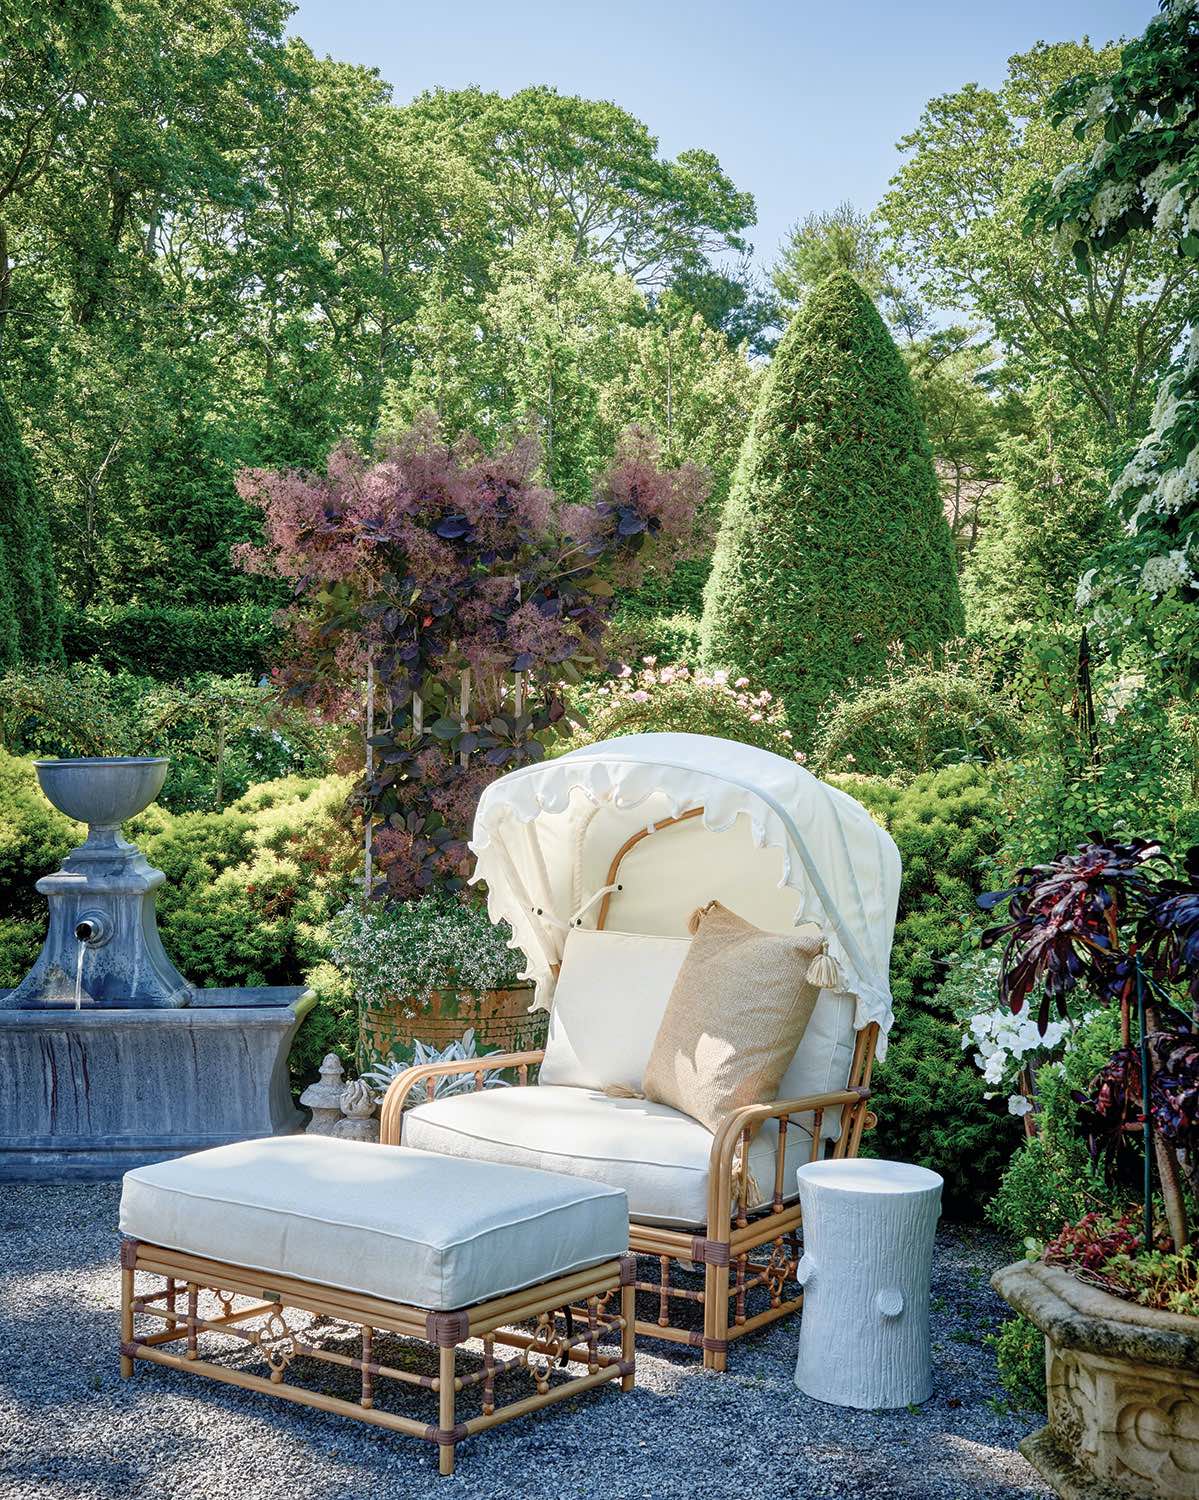 A canopied chair from Lane Venture, one of a pair, provides respite from the sun. “They’re a great place to have coffee in the morning, and they’re wide enough to get a dog or two by my side, a very important feature,” says Moss.